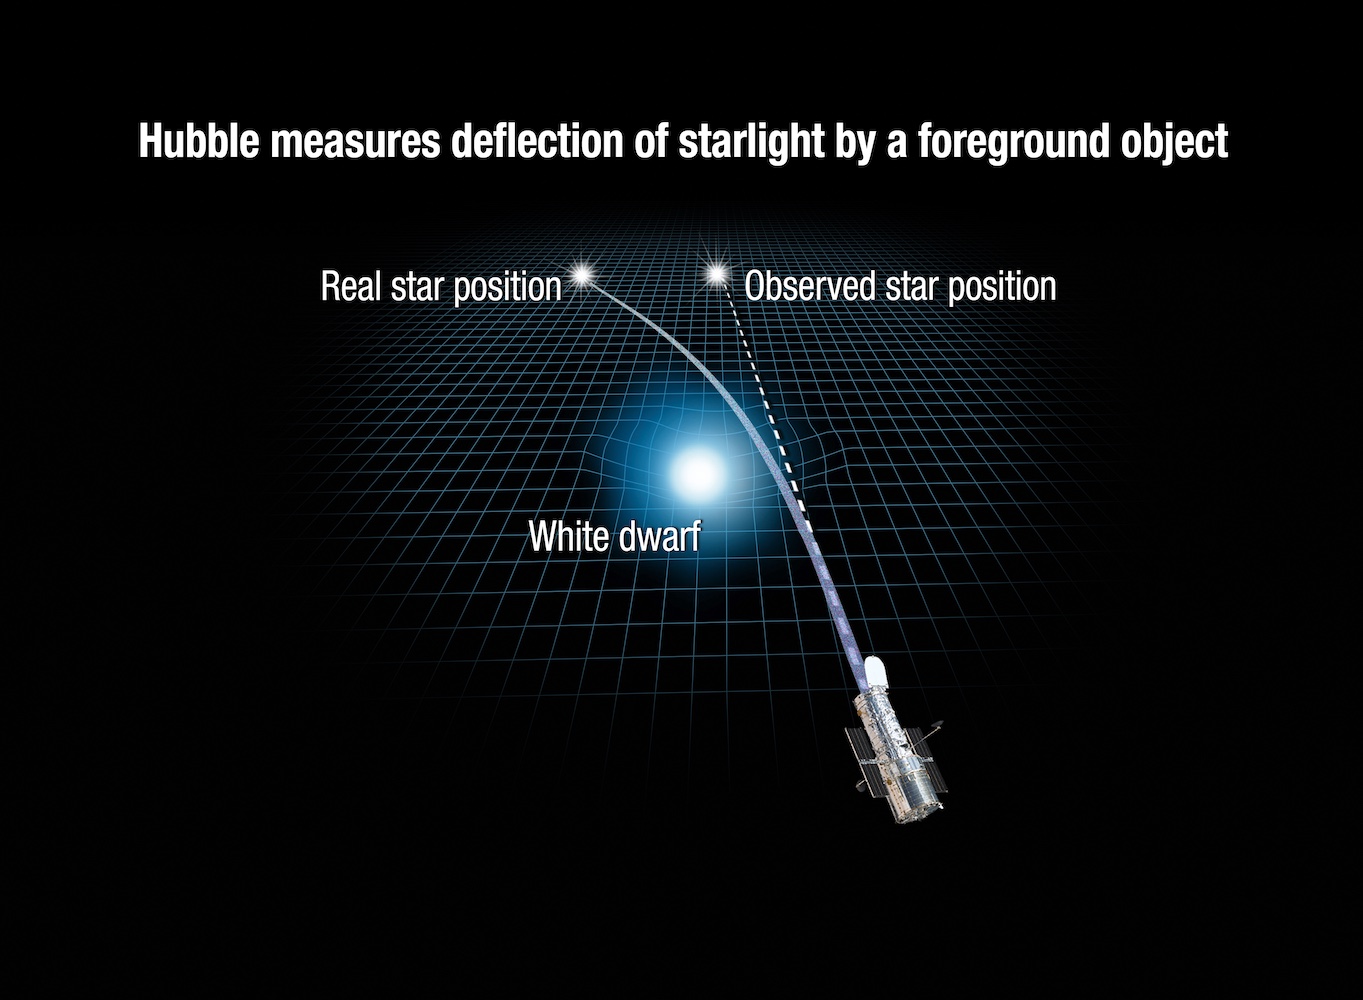 Astronomers weigh white dwarf stars through the effect of gravitational lensing